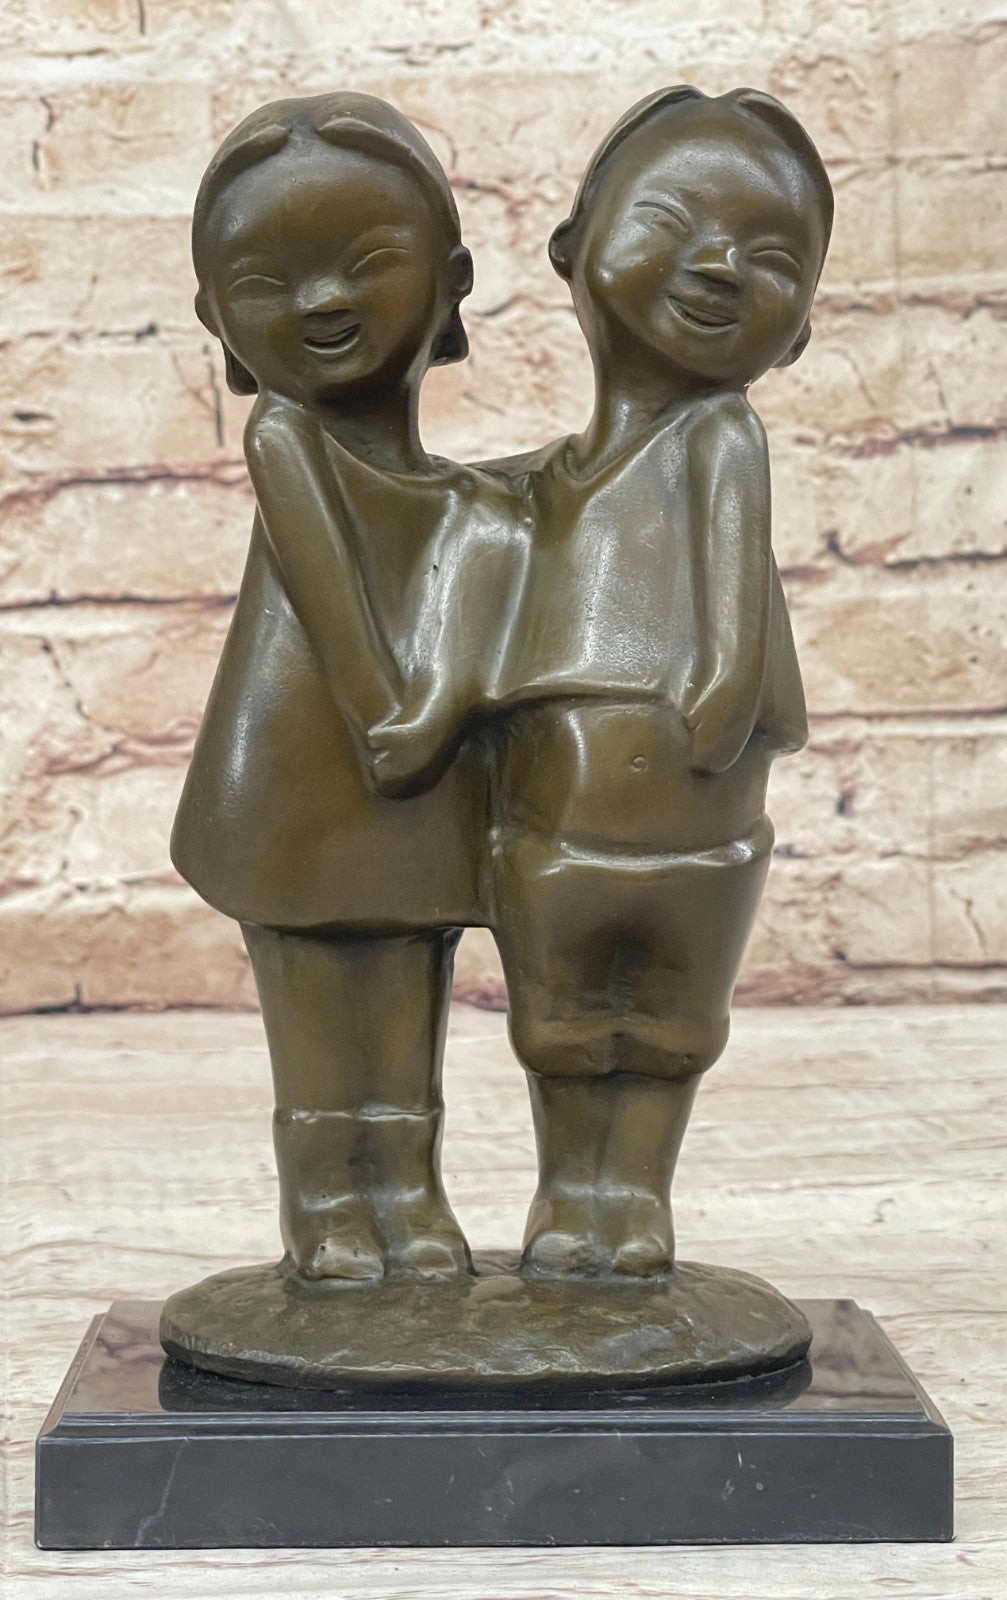 B.C Zhang Collectible Bronze Sculpture: Chinese Brother and Sister Smiling Children